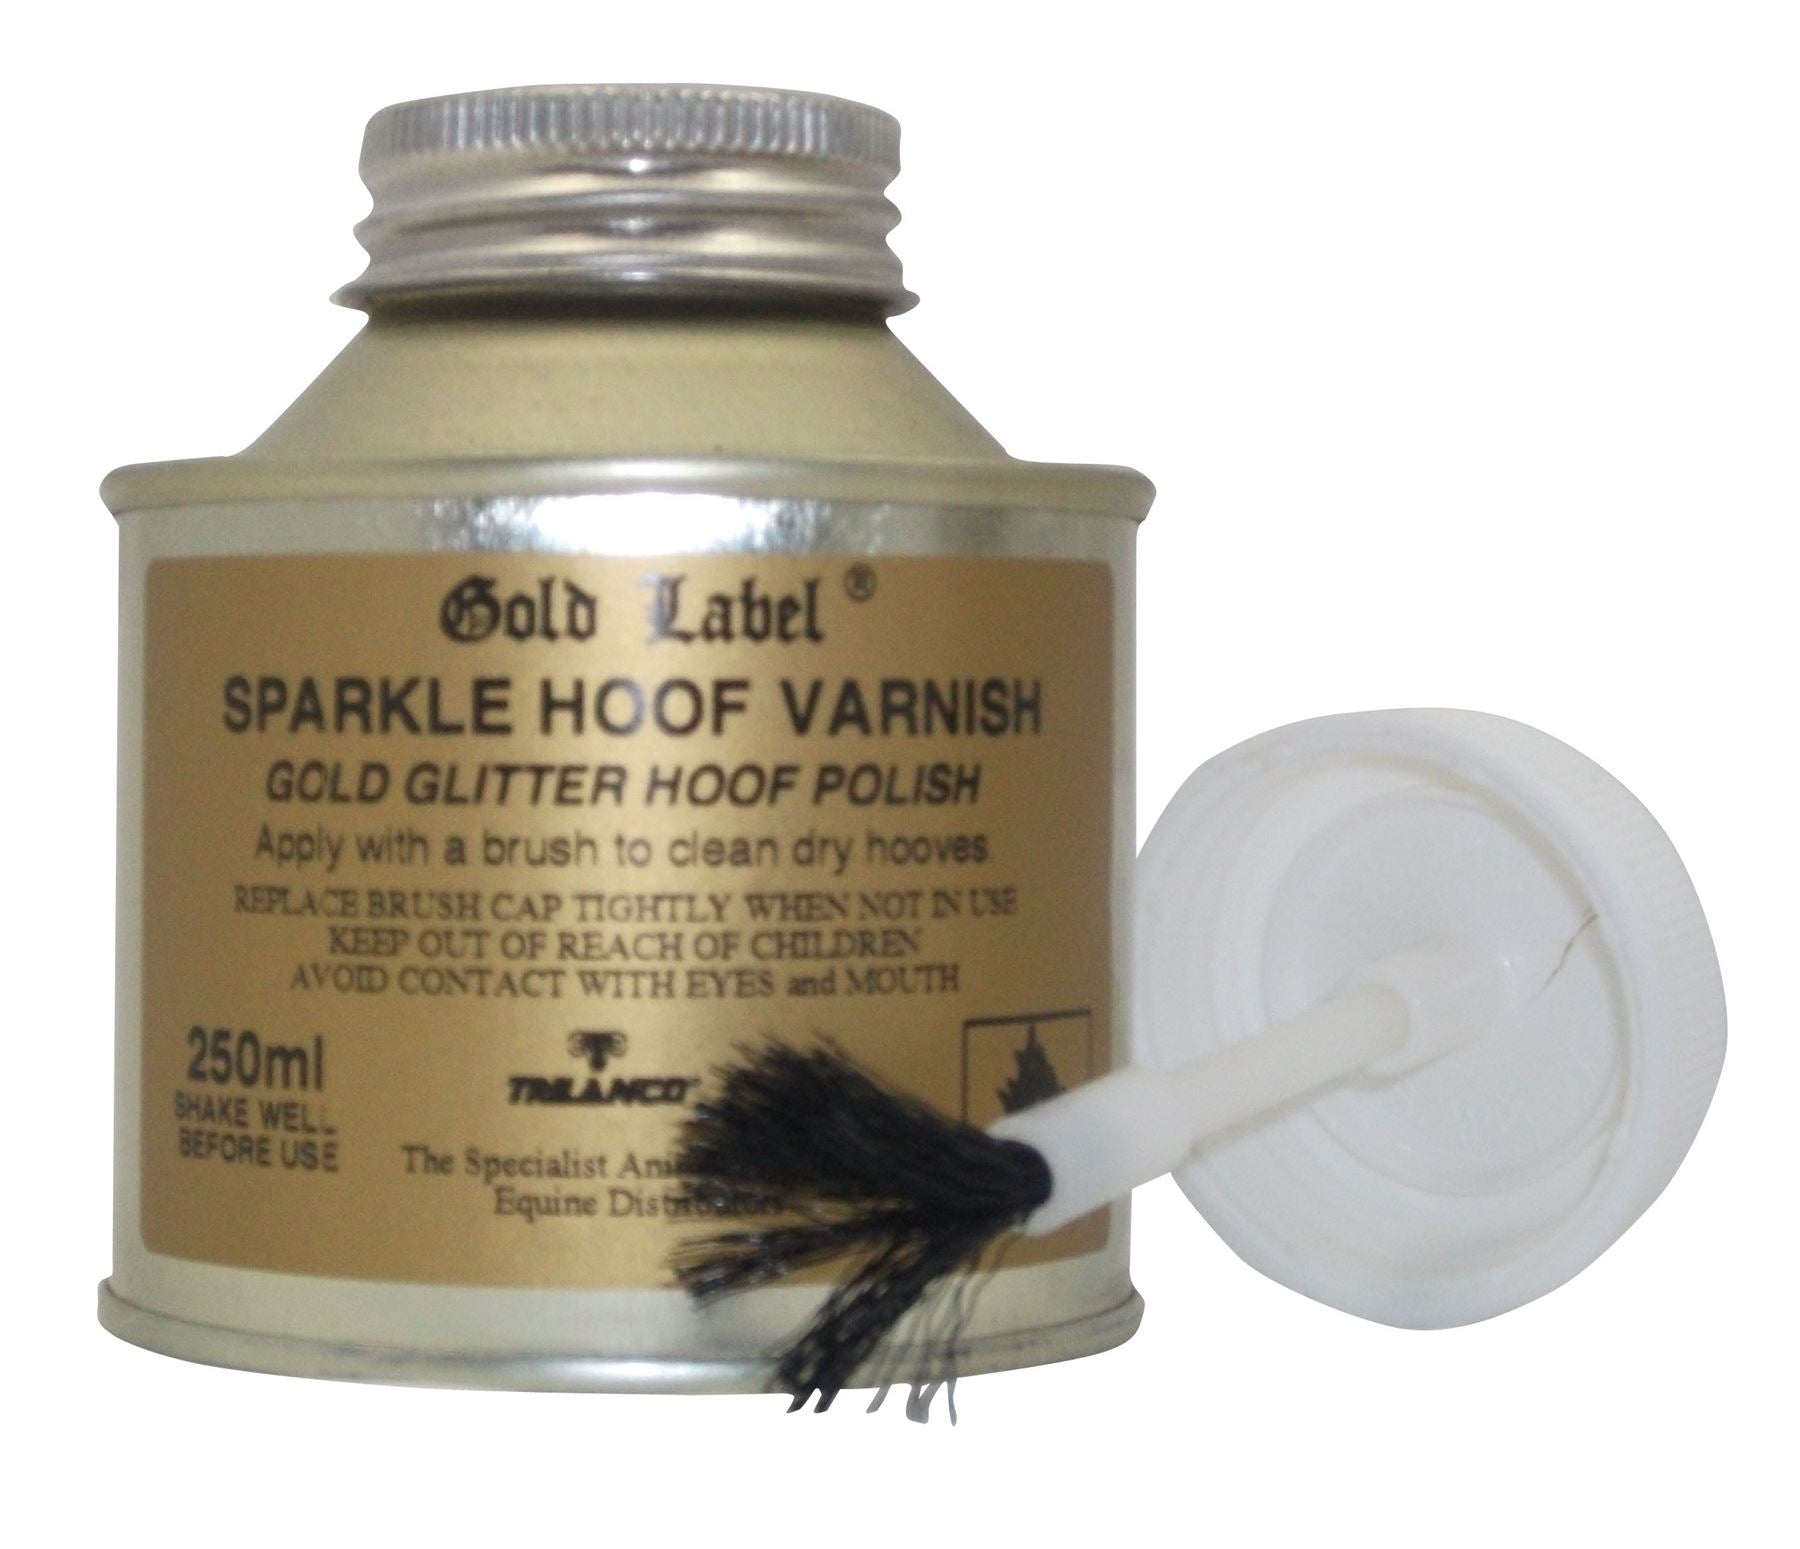 Gold Label Sparkle Hoof Varnish - Just Horse Riders